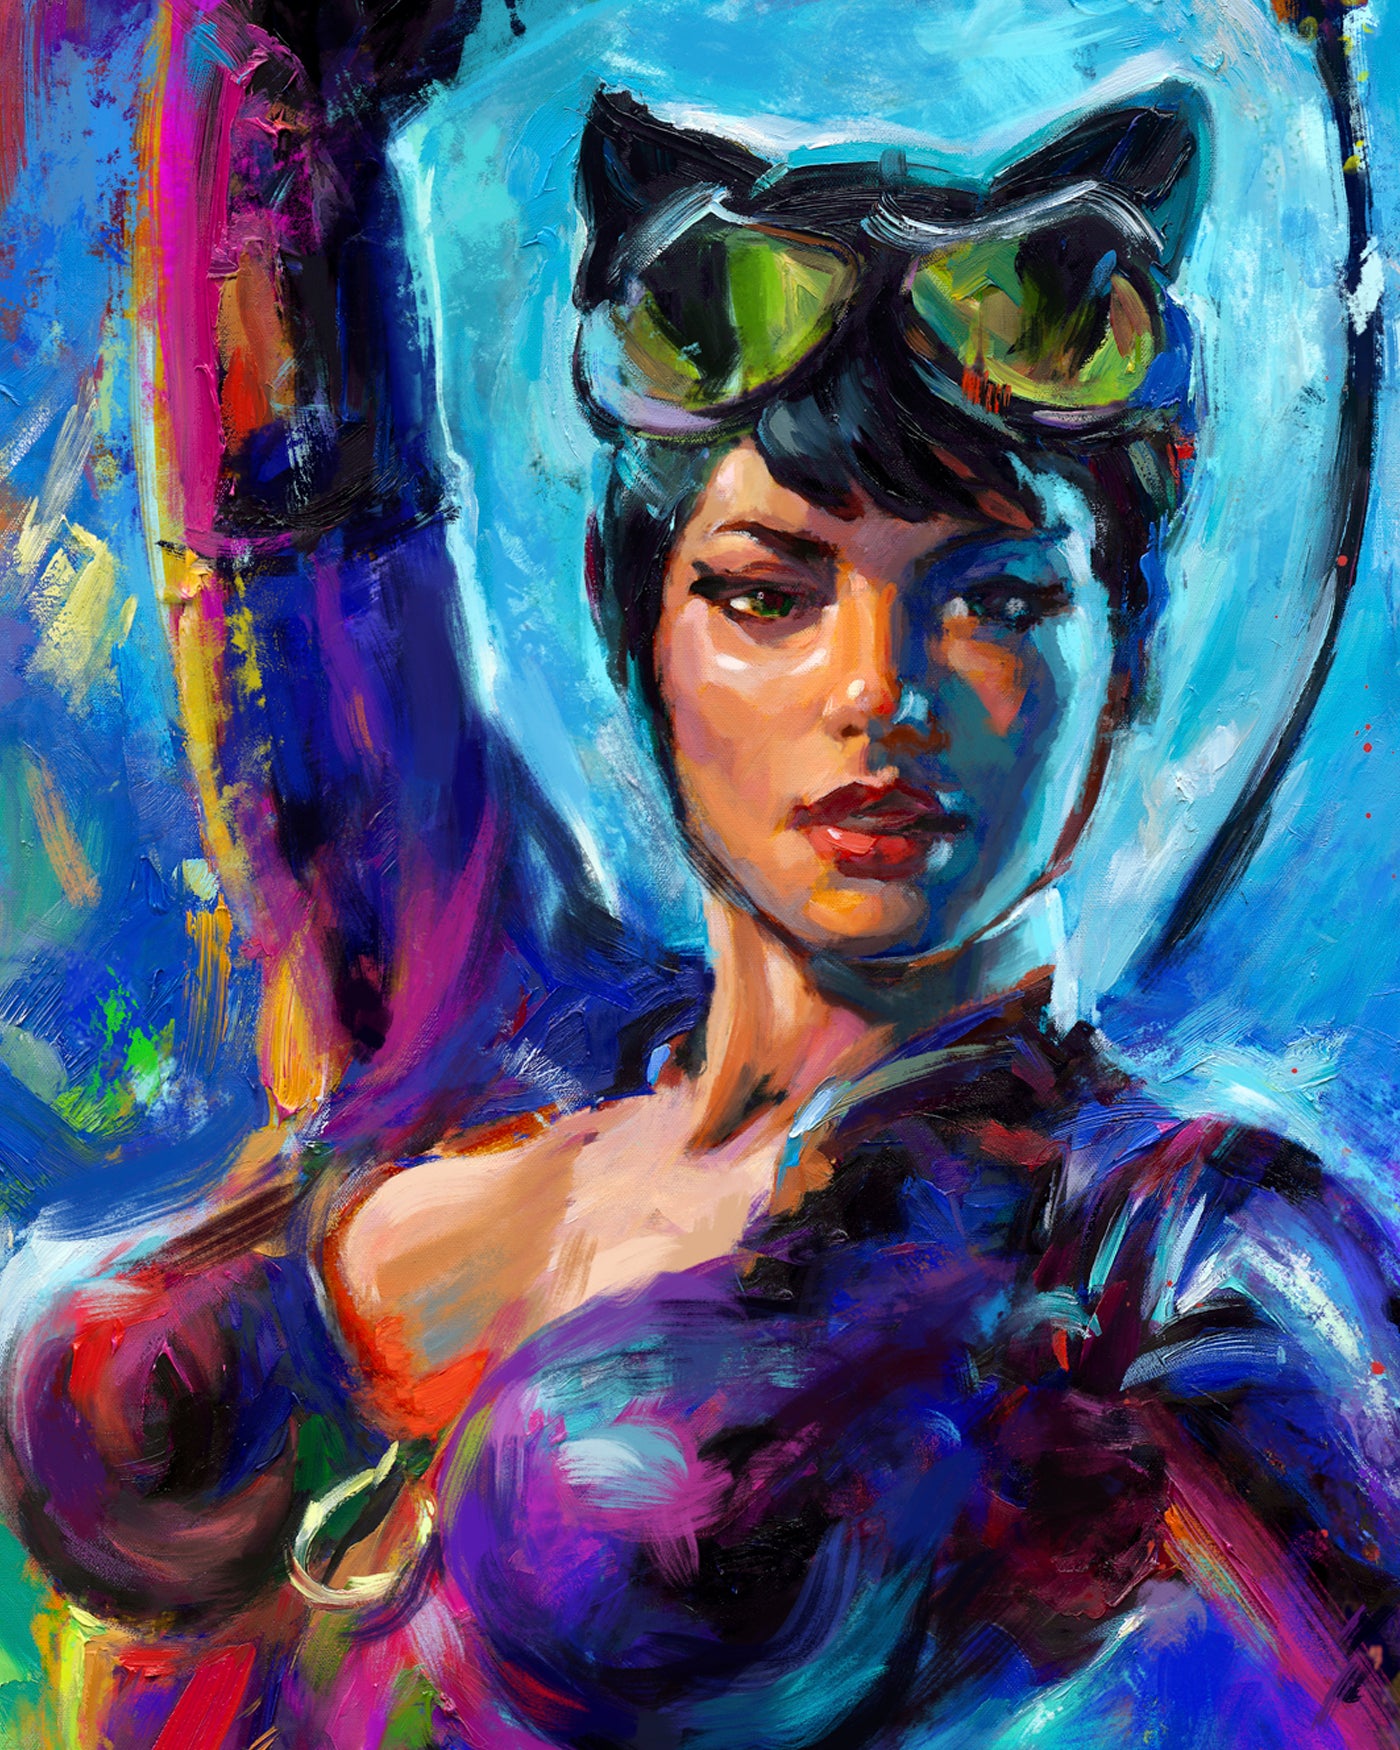 
                  
                    Oil on canvas original painting of Catwoman, DC Comics Selina Kyle, surrounded by the blue color of Gotham's night sky, she stalks her prey holding her whip and crouching on top of a building with her cat Isis nearby in colorful brushstrokes, color expressionism style detailed close up.
                  
                